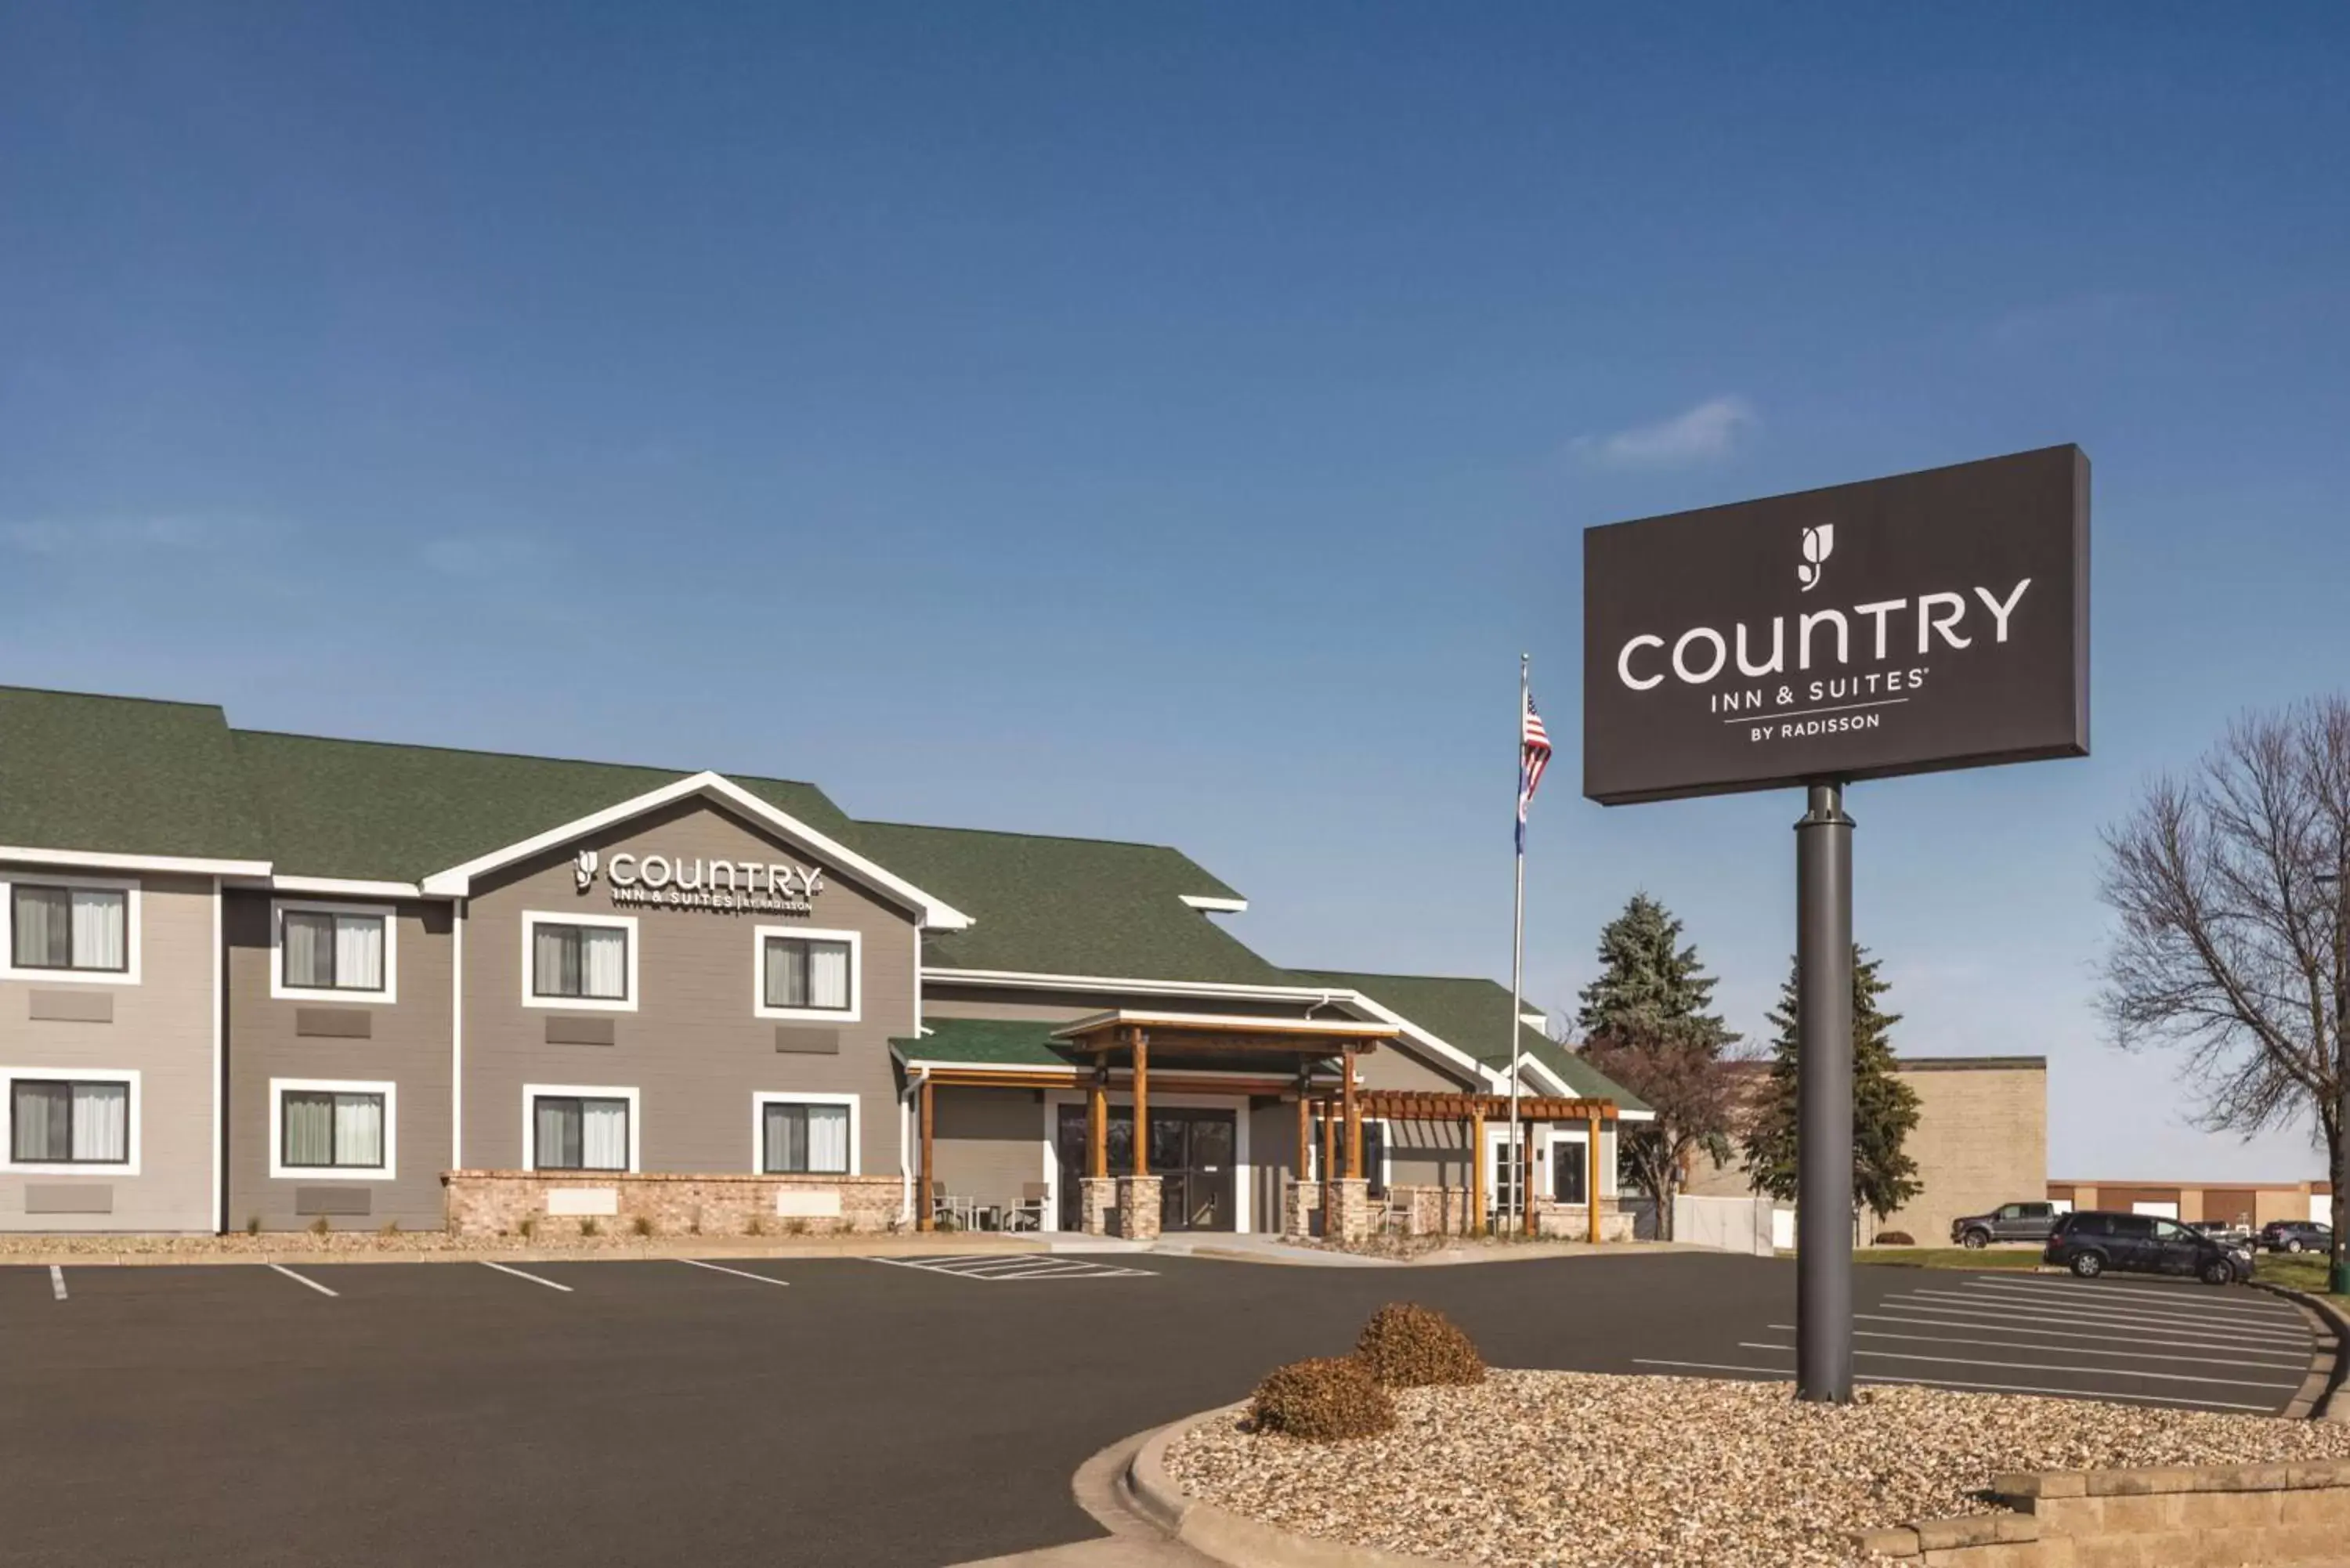 Property building in Country Inn & Suites by Radisson, Northfield, MN